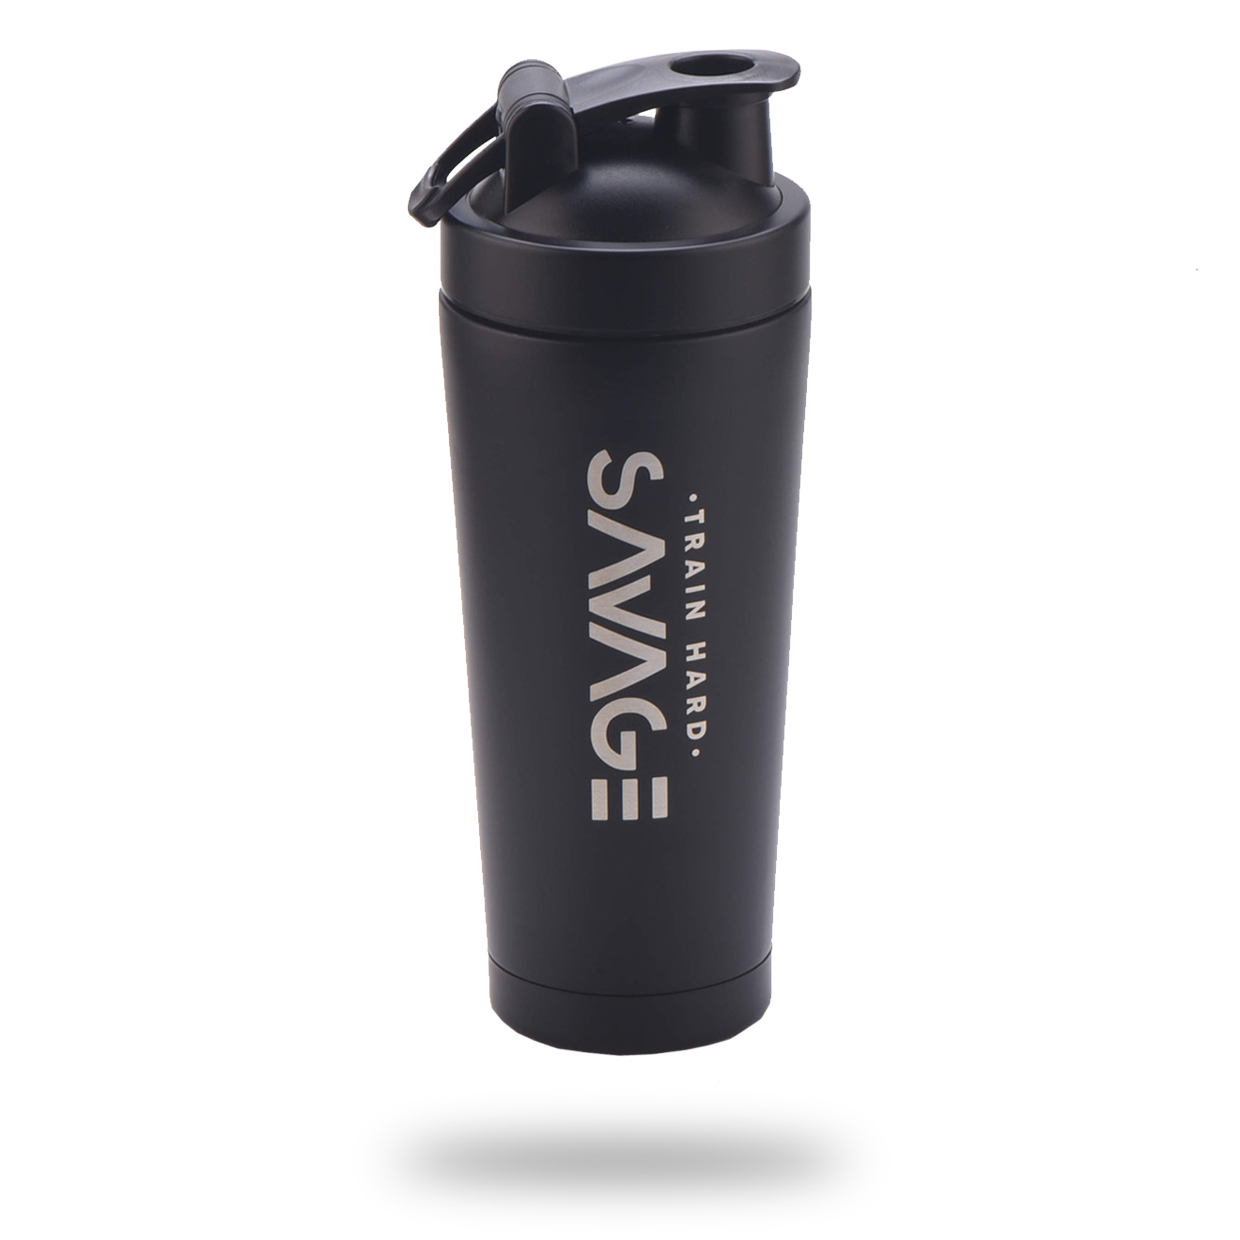 700ml Stainless Steel Insulated Shaker Bottle - Savage Fitness Accessories